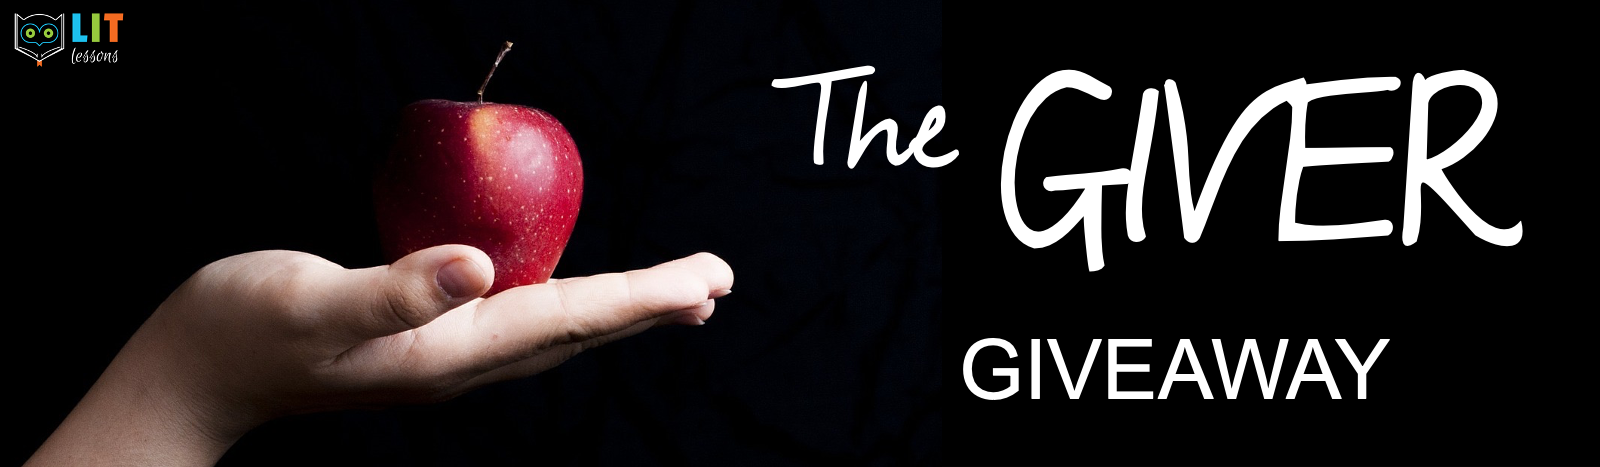 Win Our The Giver Novel Study and a Class Set of The Giver Books for Your Students